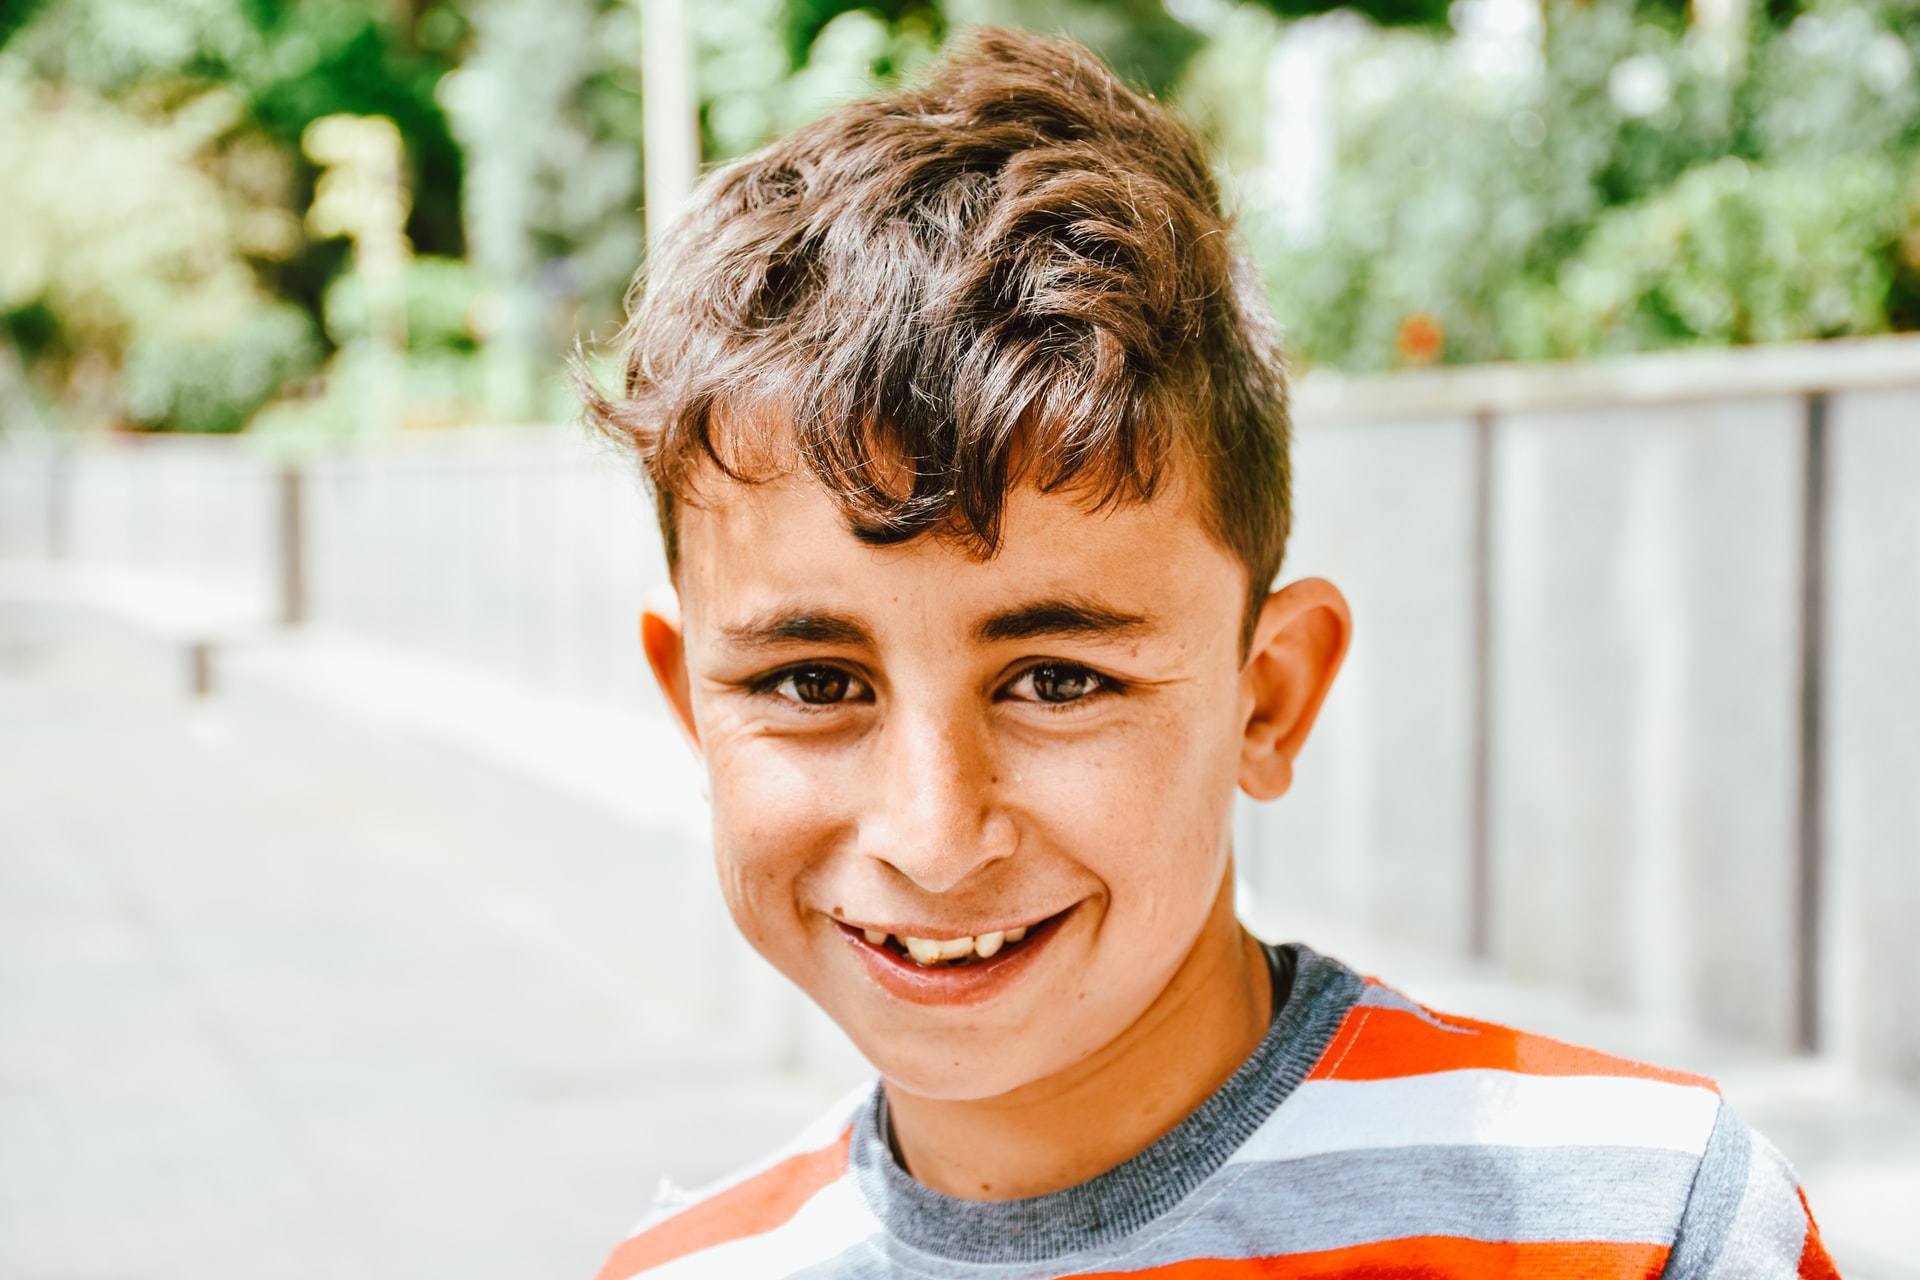 A middle school aged boy in a striped shirt smiles at the camera.